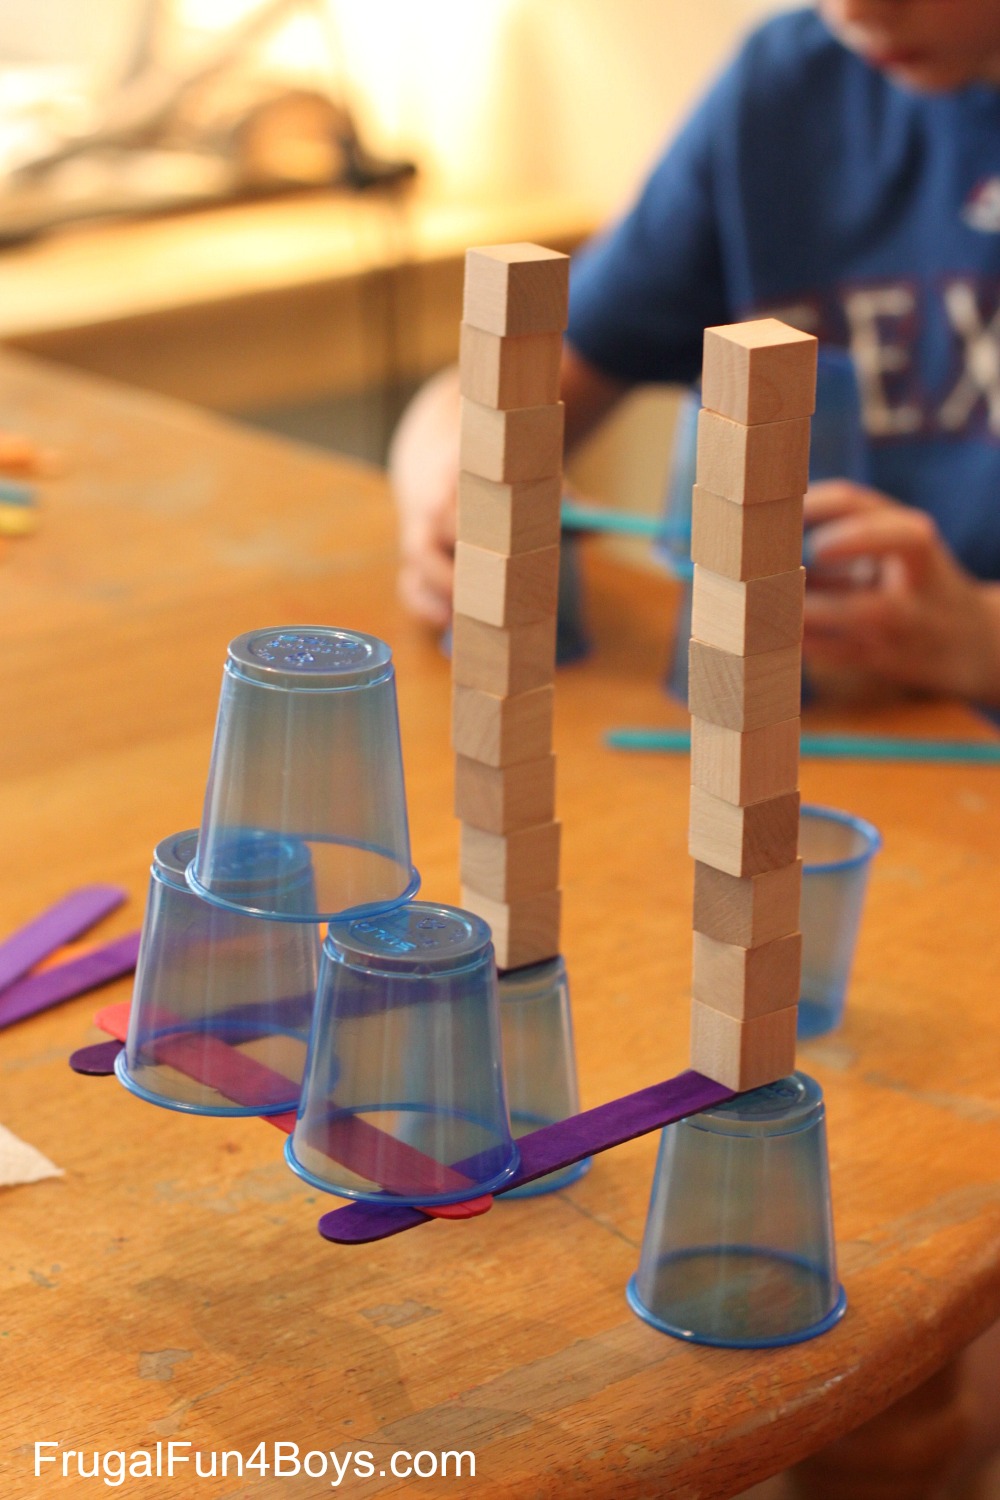 4 Engineering Challenges for Kids